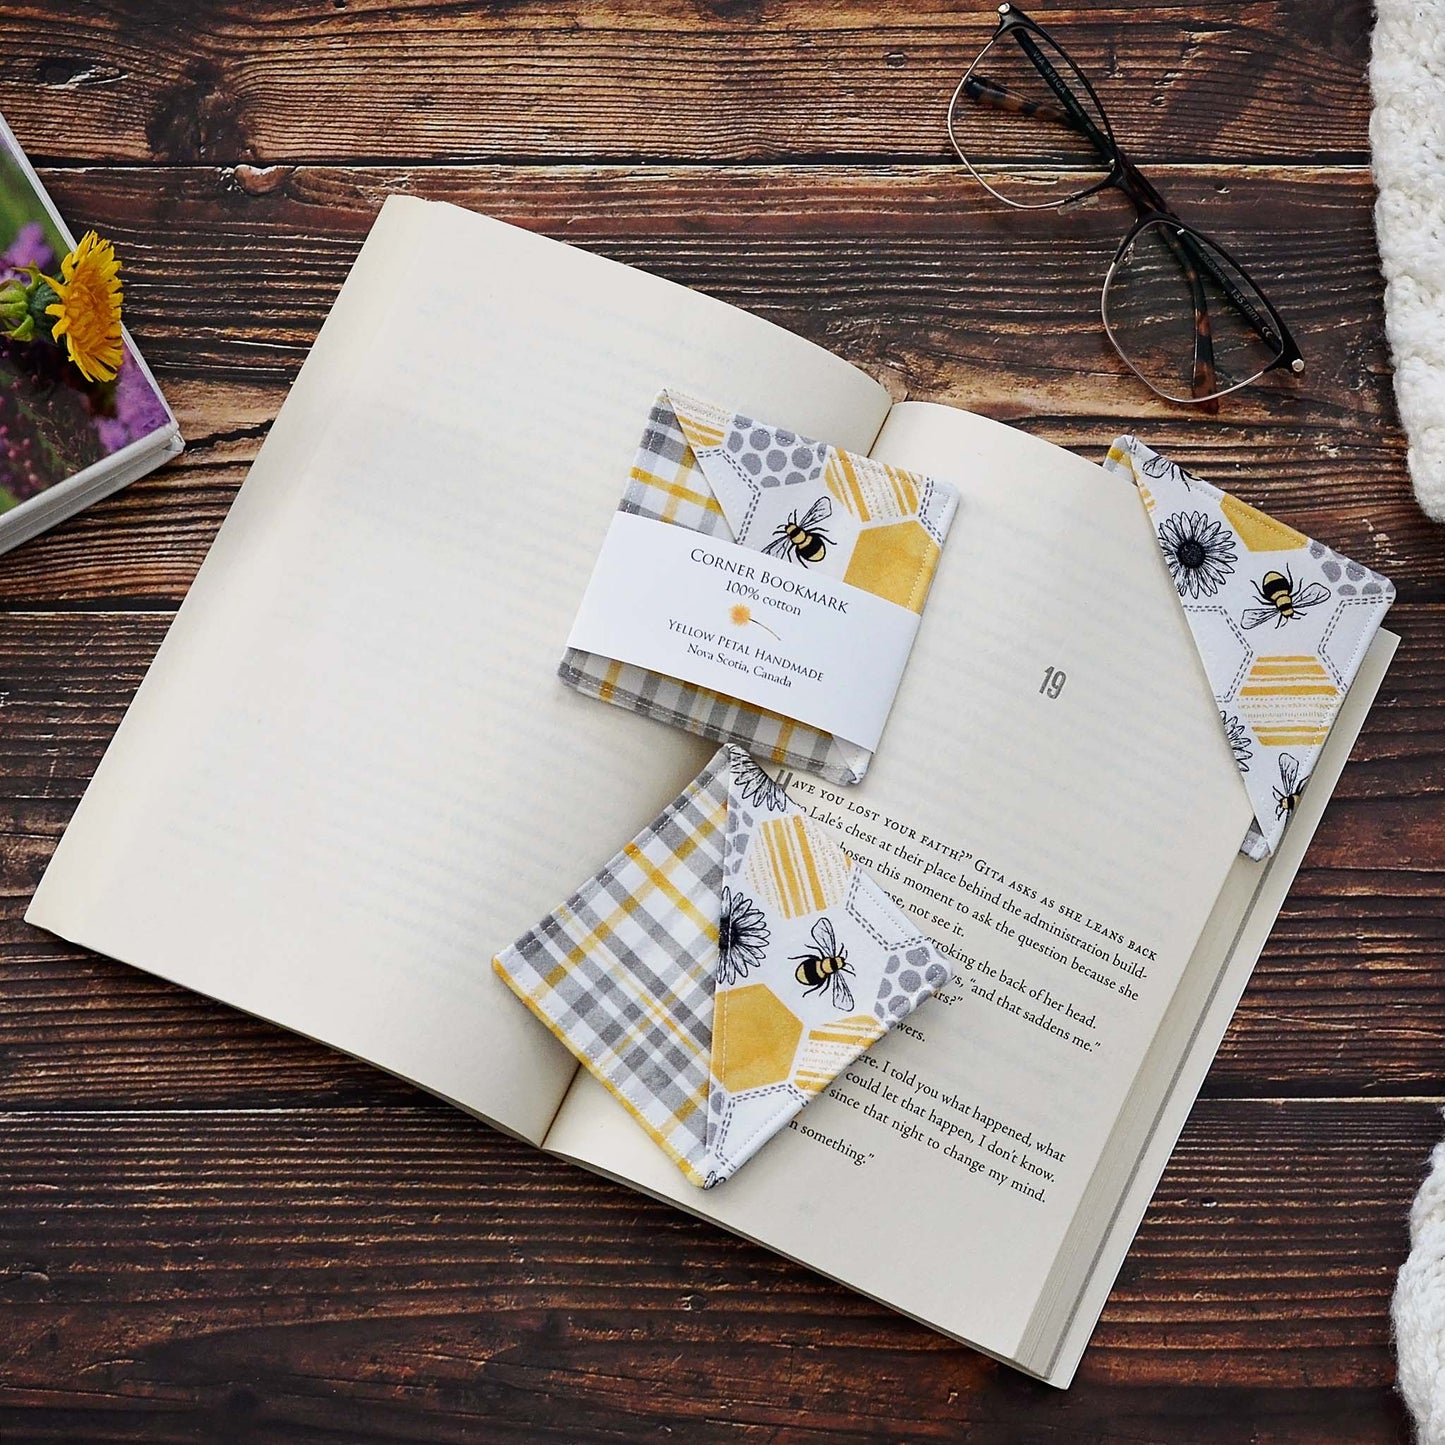 Fun bee corner bookmarks in three fabric choices, yellow, charcoal and plaid.  These make a great bee gift!  Made in Canada by Yellow Petal Handmade.